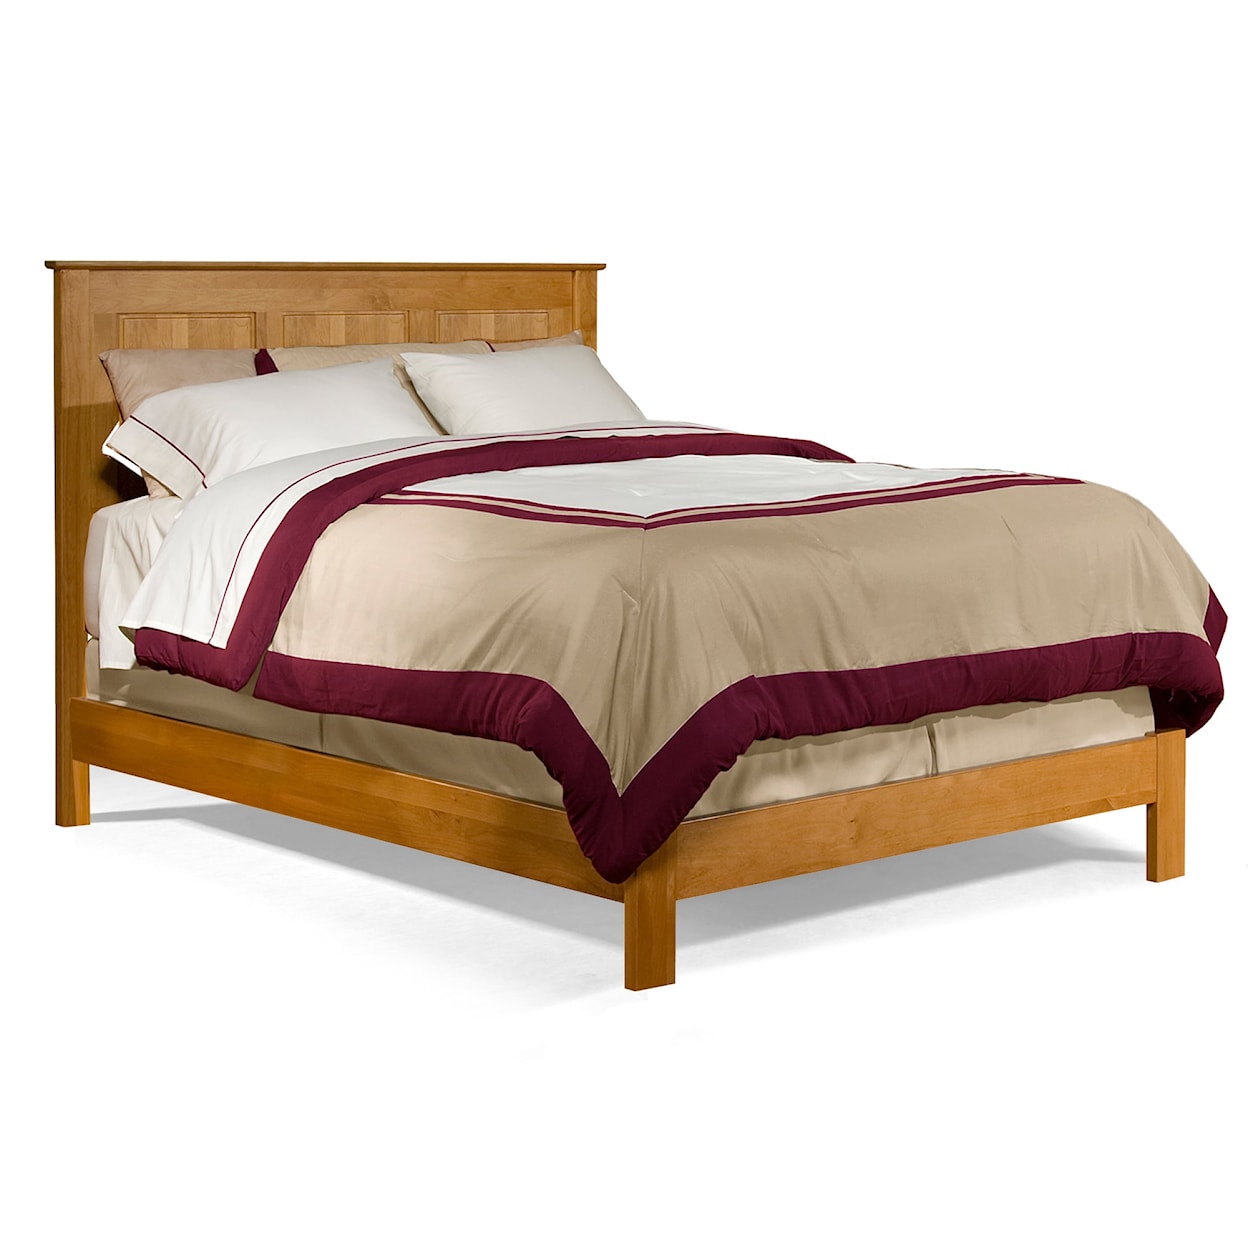 Archbold Furniture Beds Queen Essential Panel Bed